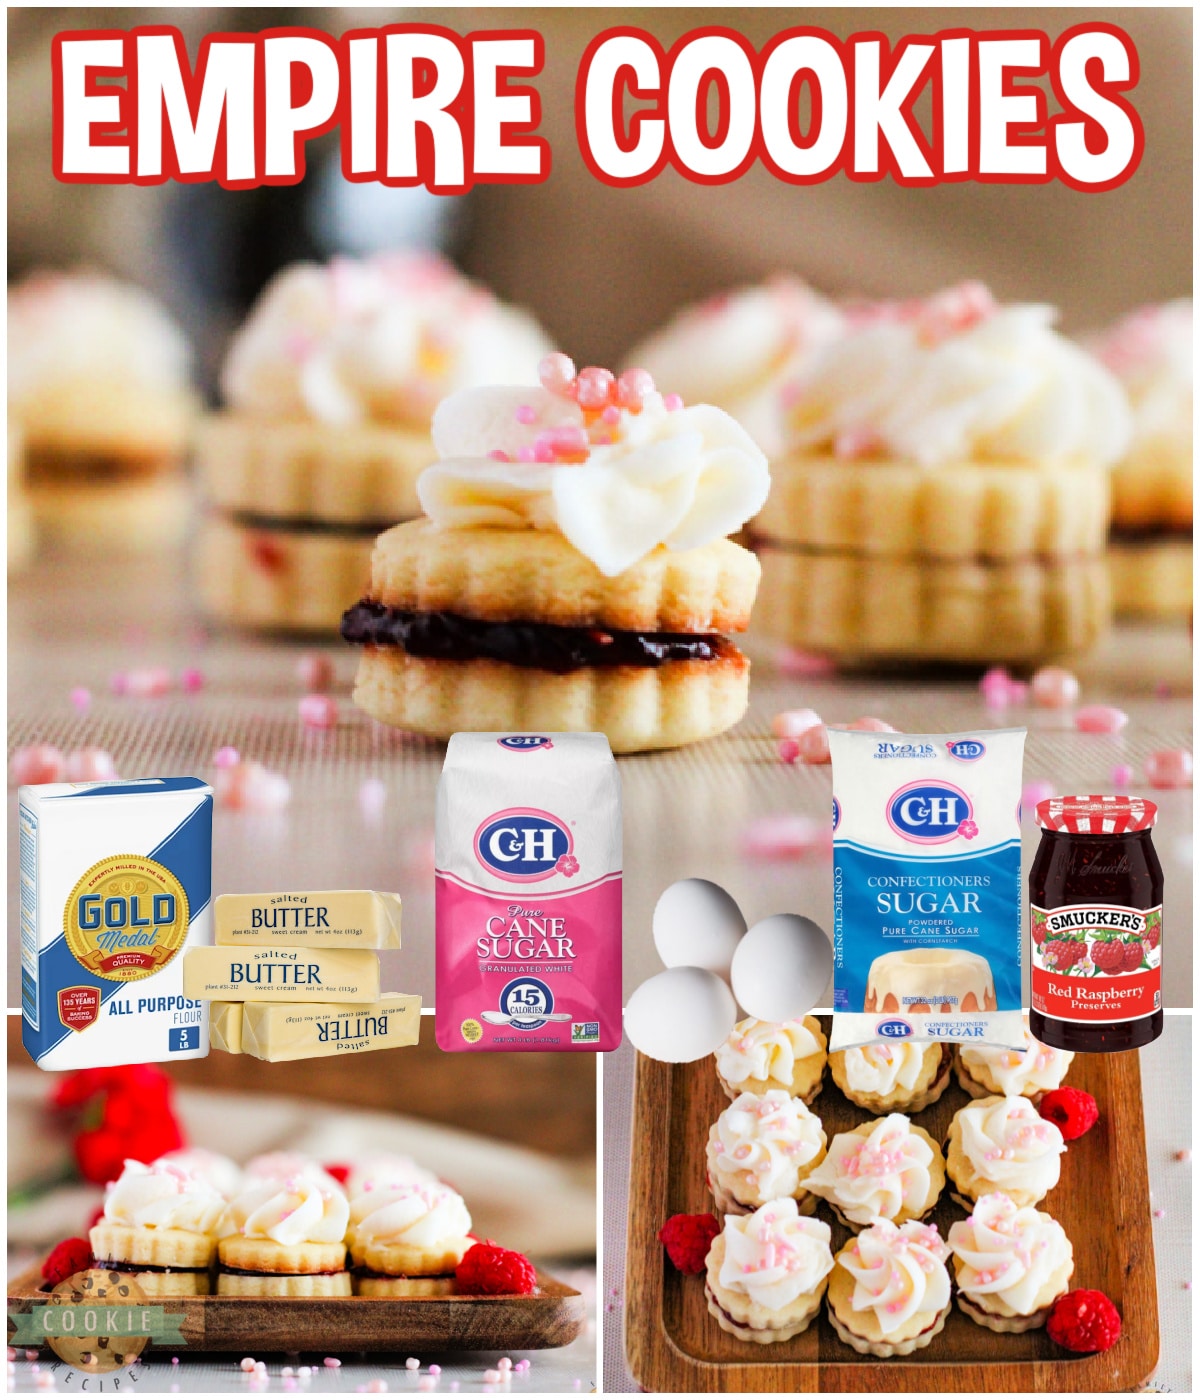 Empire Cookies are buttery shortbread cookie sandwiches filled with raspberry jam and topped with a simple buttercream frosting. Delicious cookies that are both pretty and delicious!